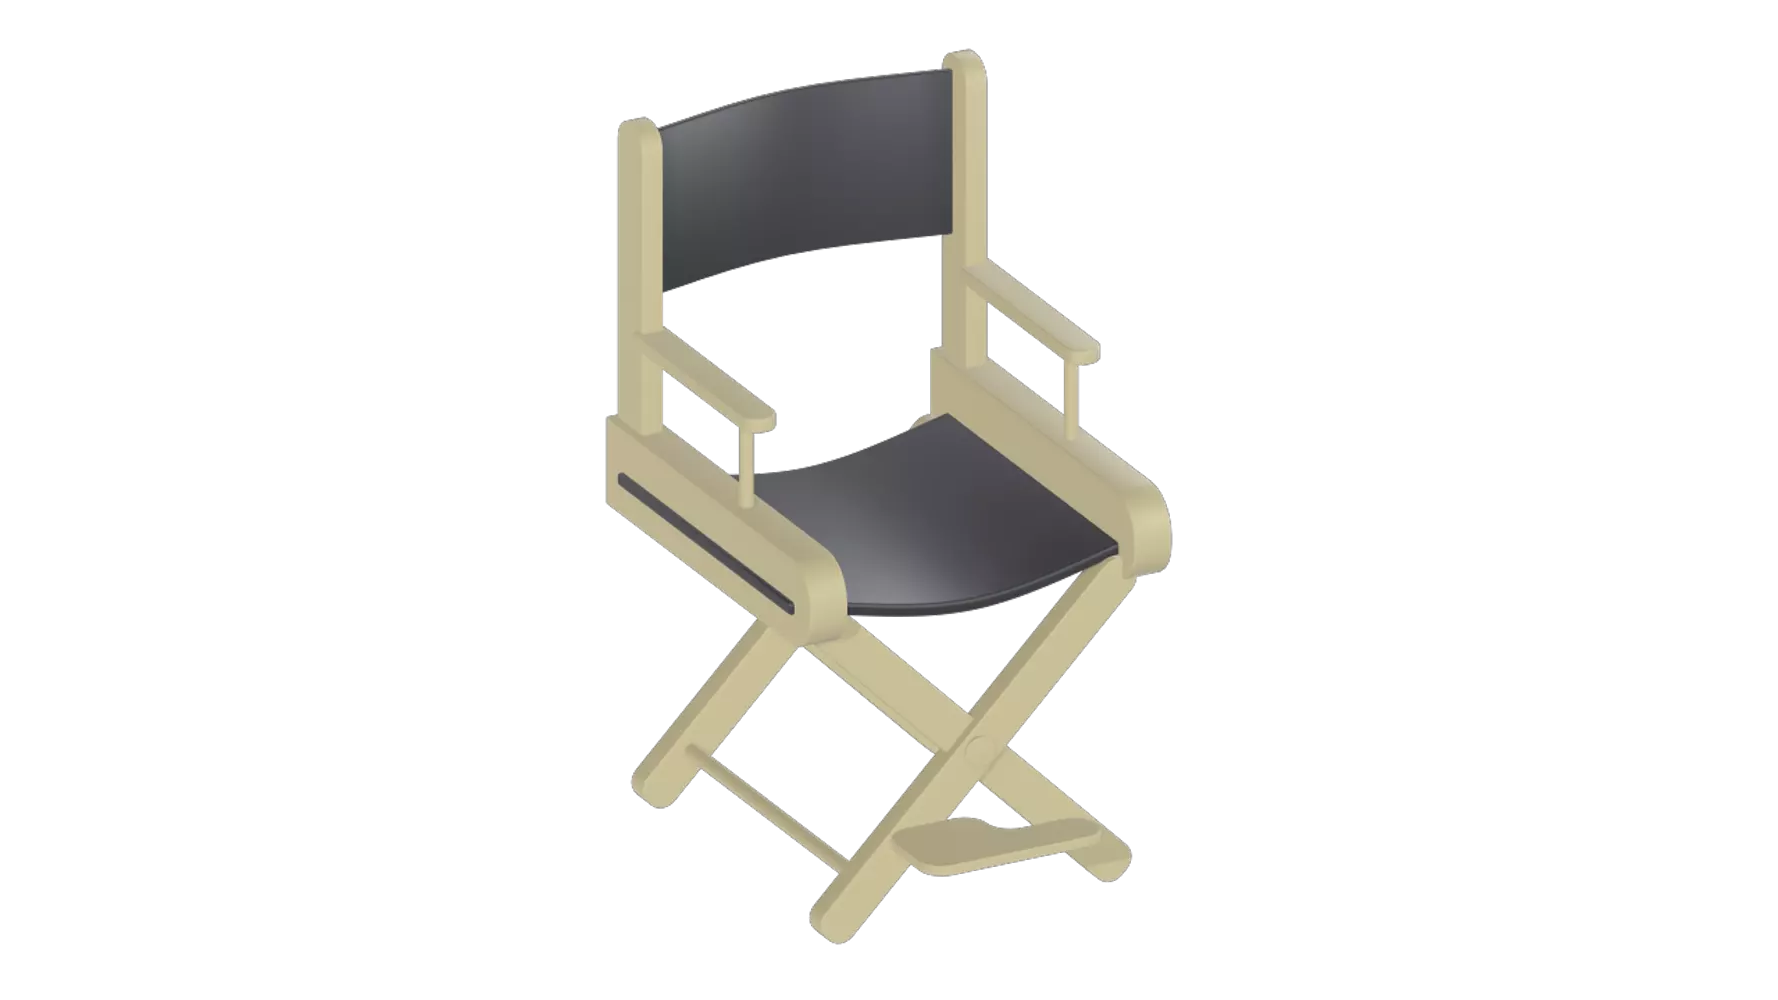 Director Seat 3D Graphic